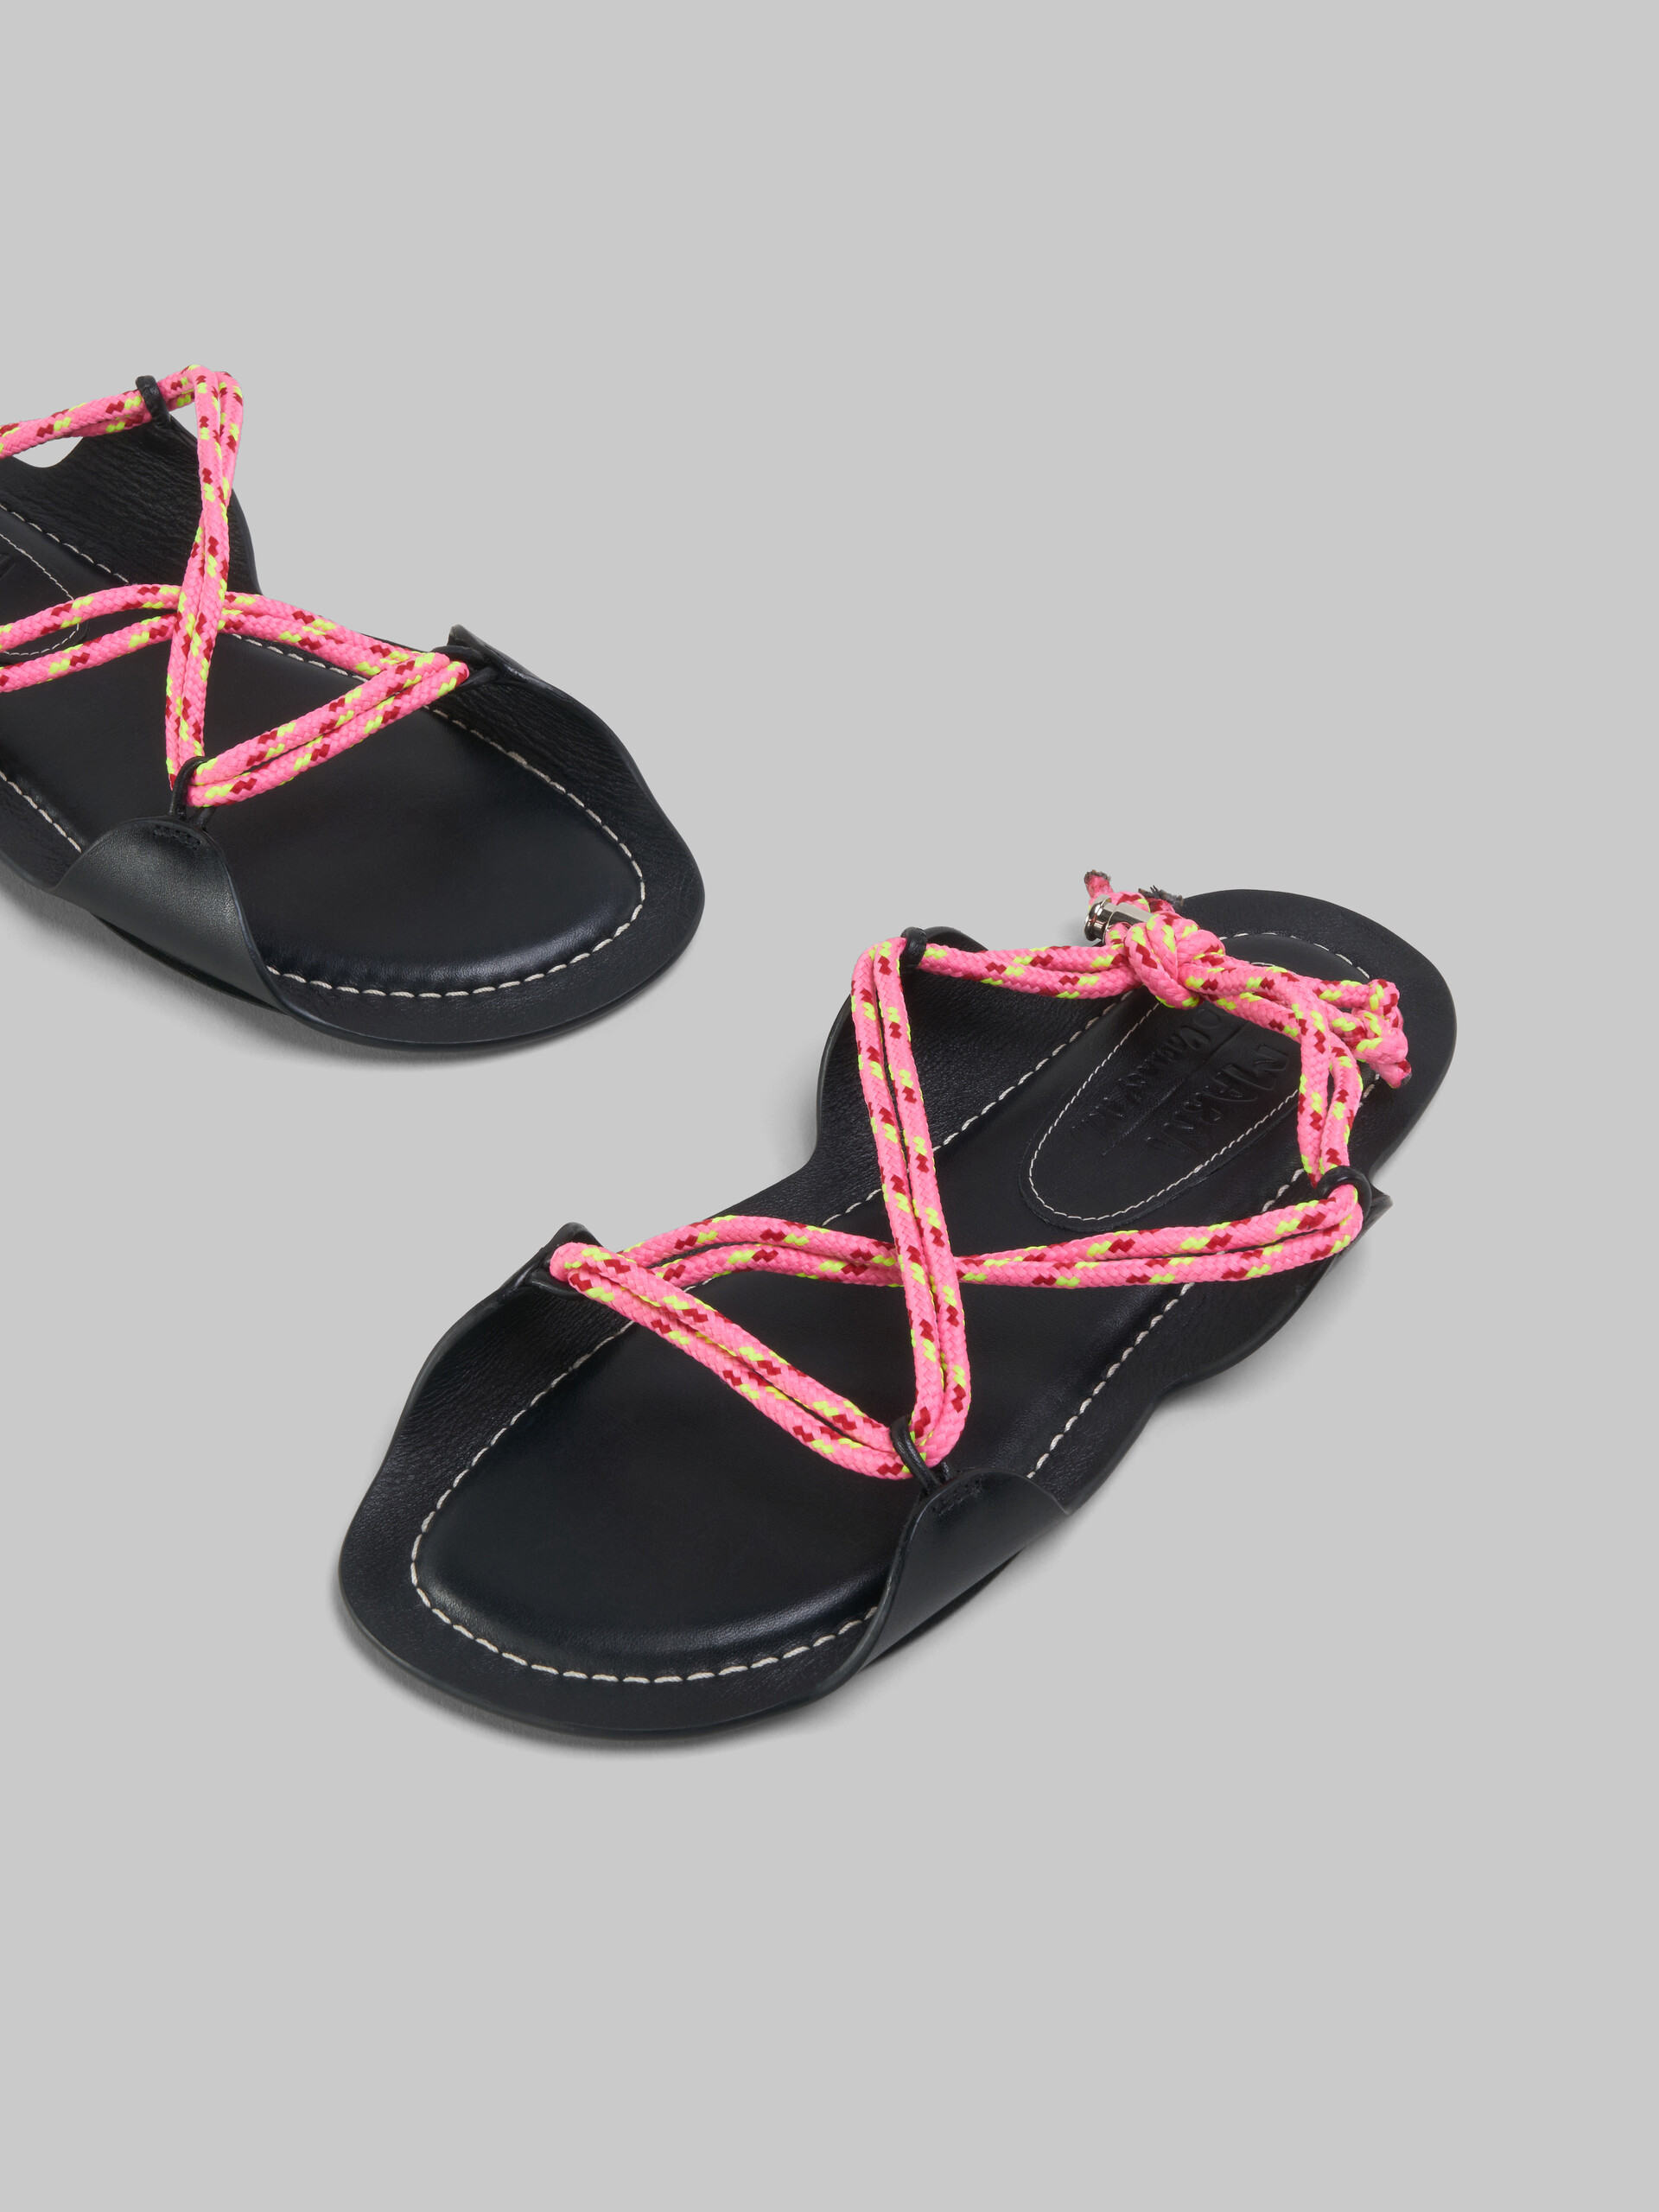 Marni x No Vacancy Inn - Black leather sandals with multicolour rope - Sandals - Image 5